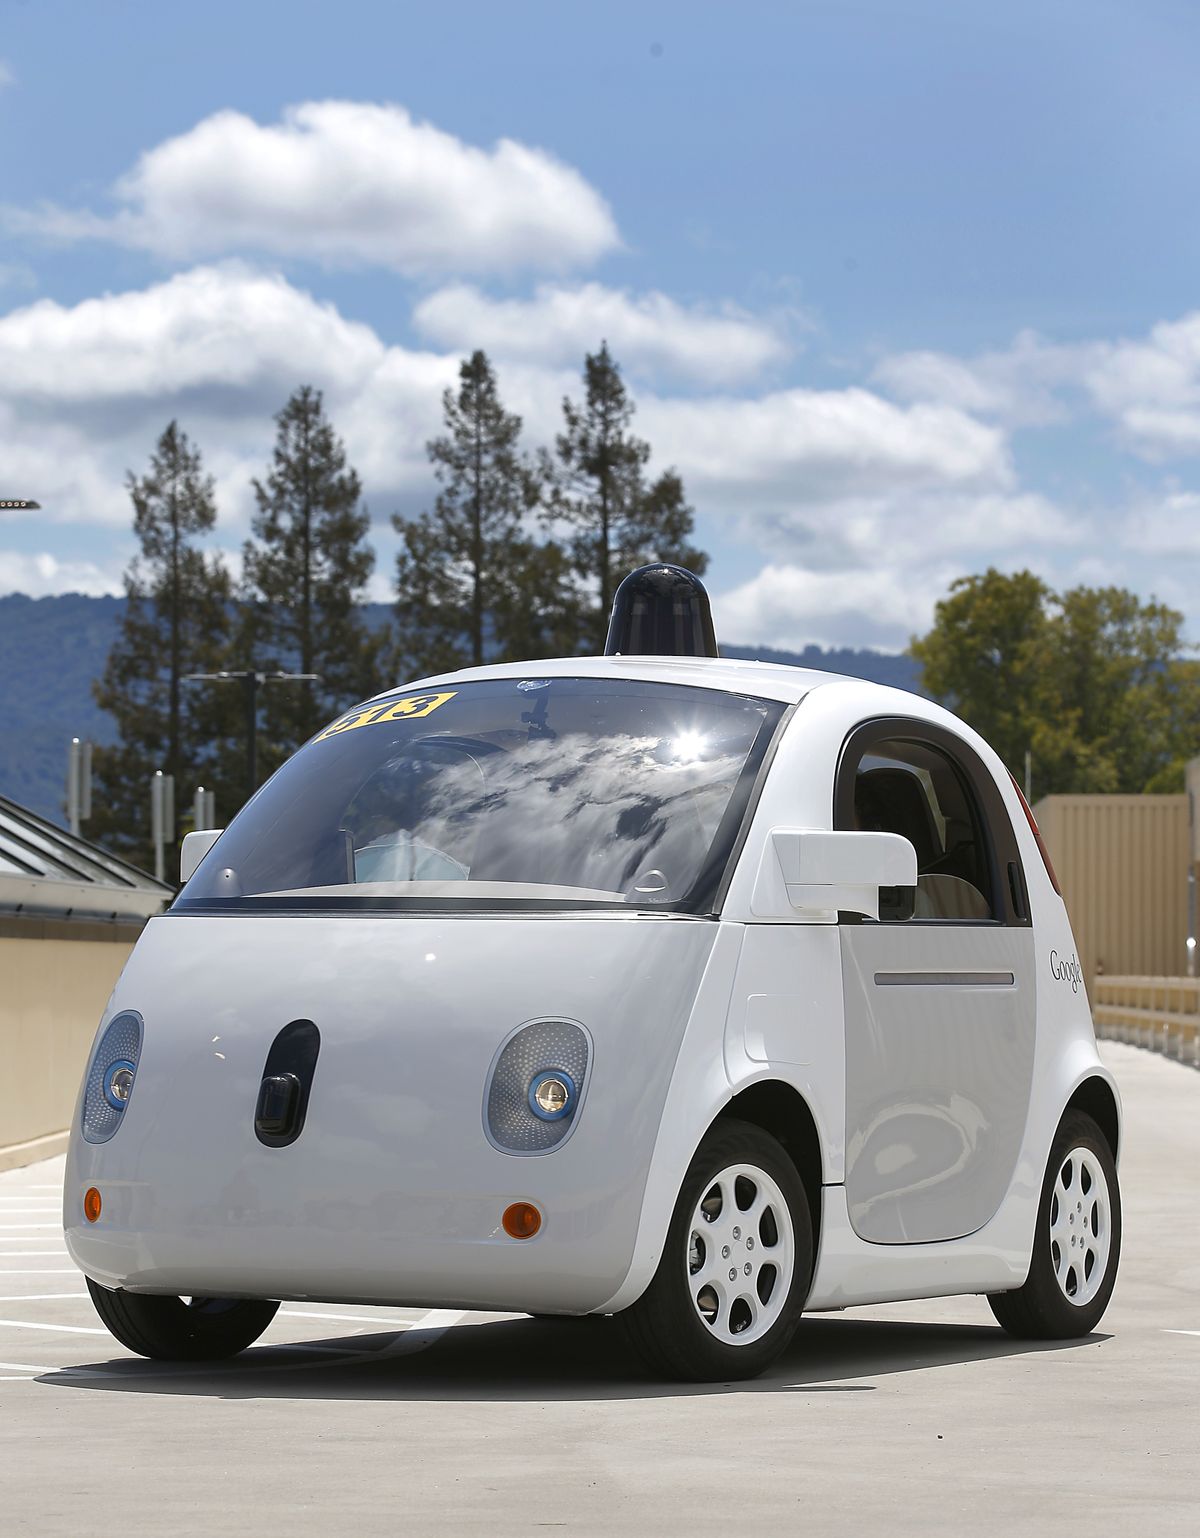 Google’s self-driving prototype car drives around a parking lot at the Google campus in Mountain View, Calif., on May 13. Google has hired former Hyundai and Ford Motor Co. executive John Krafcik to head its self-driving car division. (Associated Press)